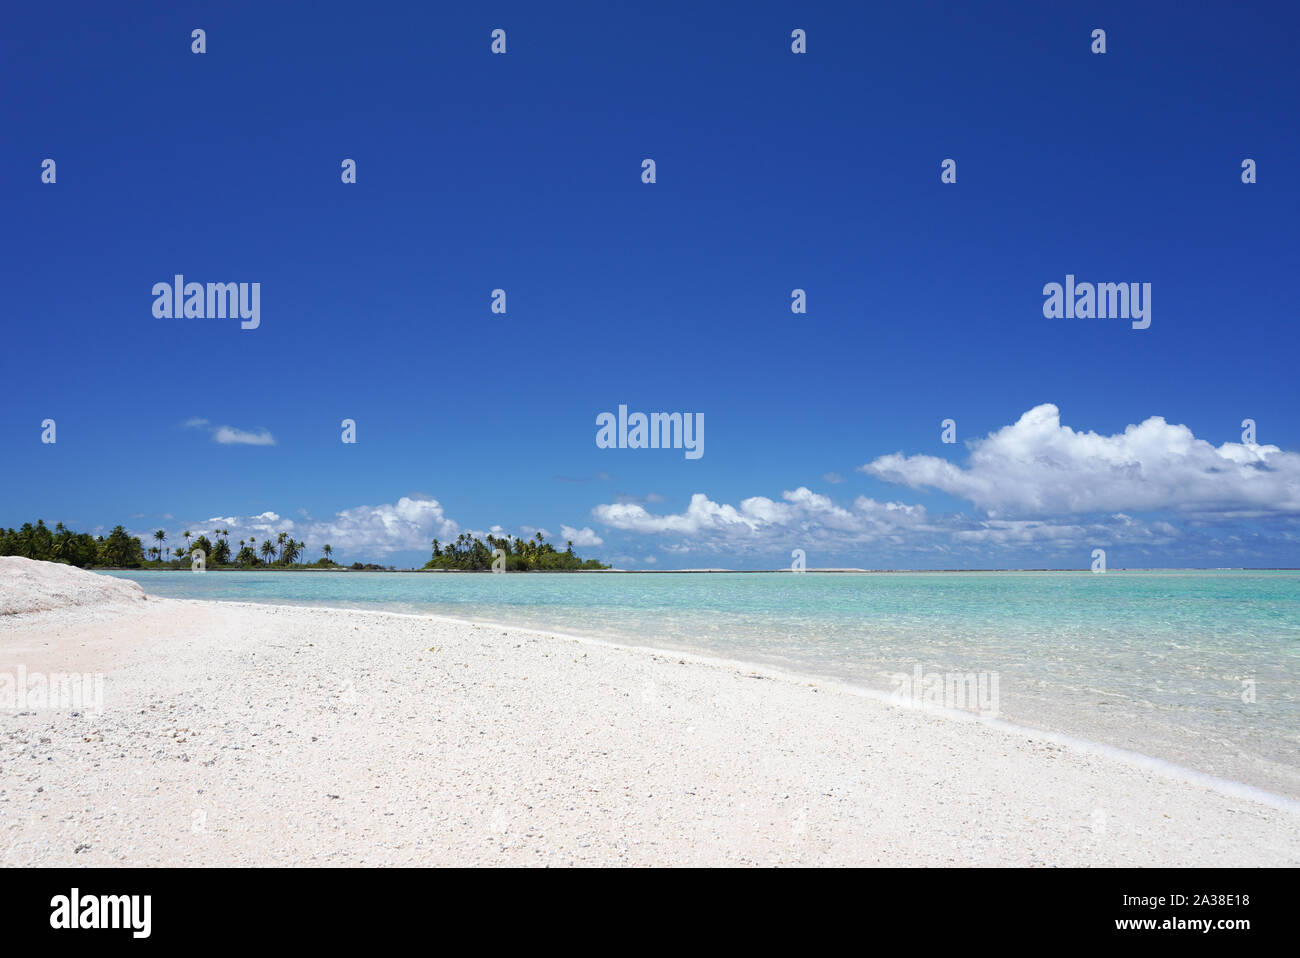 Turquoise water washes up on a white sandy beach with palm trees on a tropical island Stock Photo